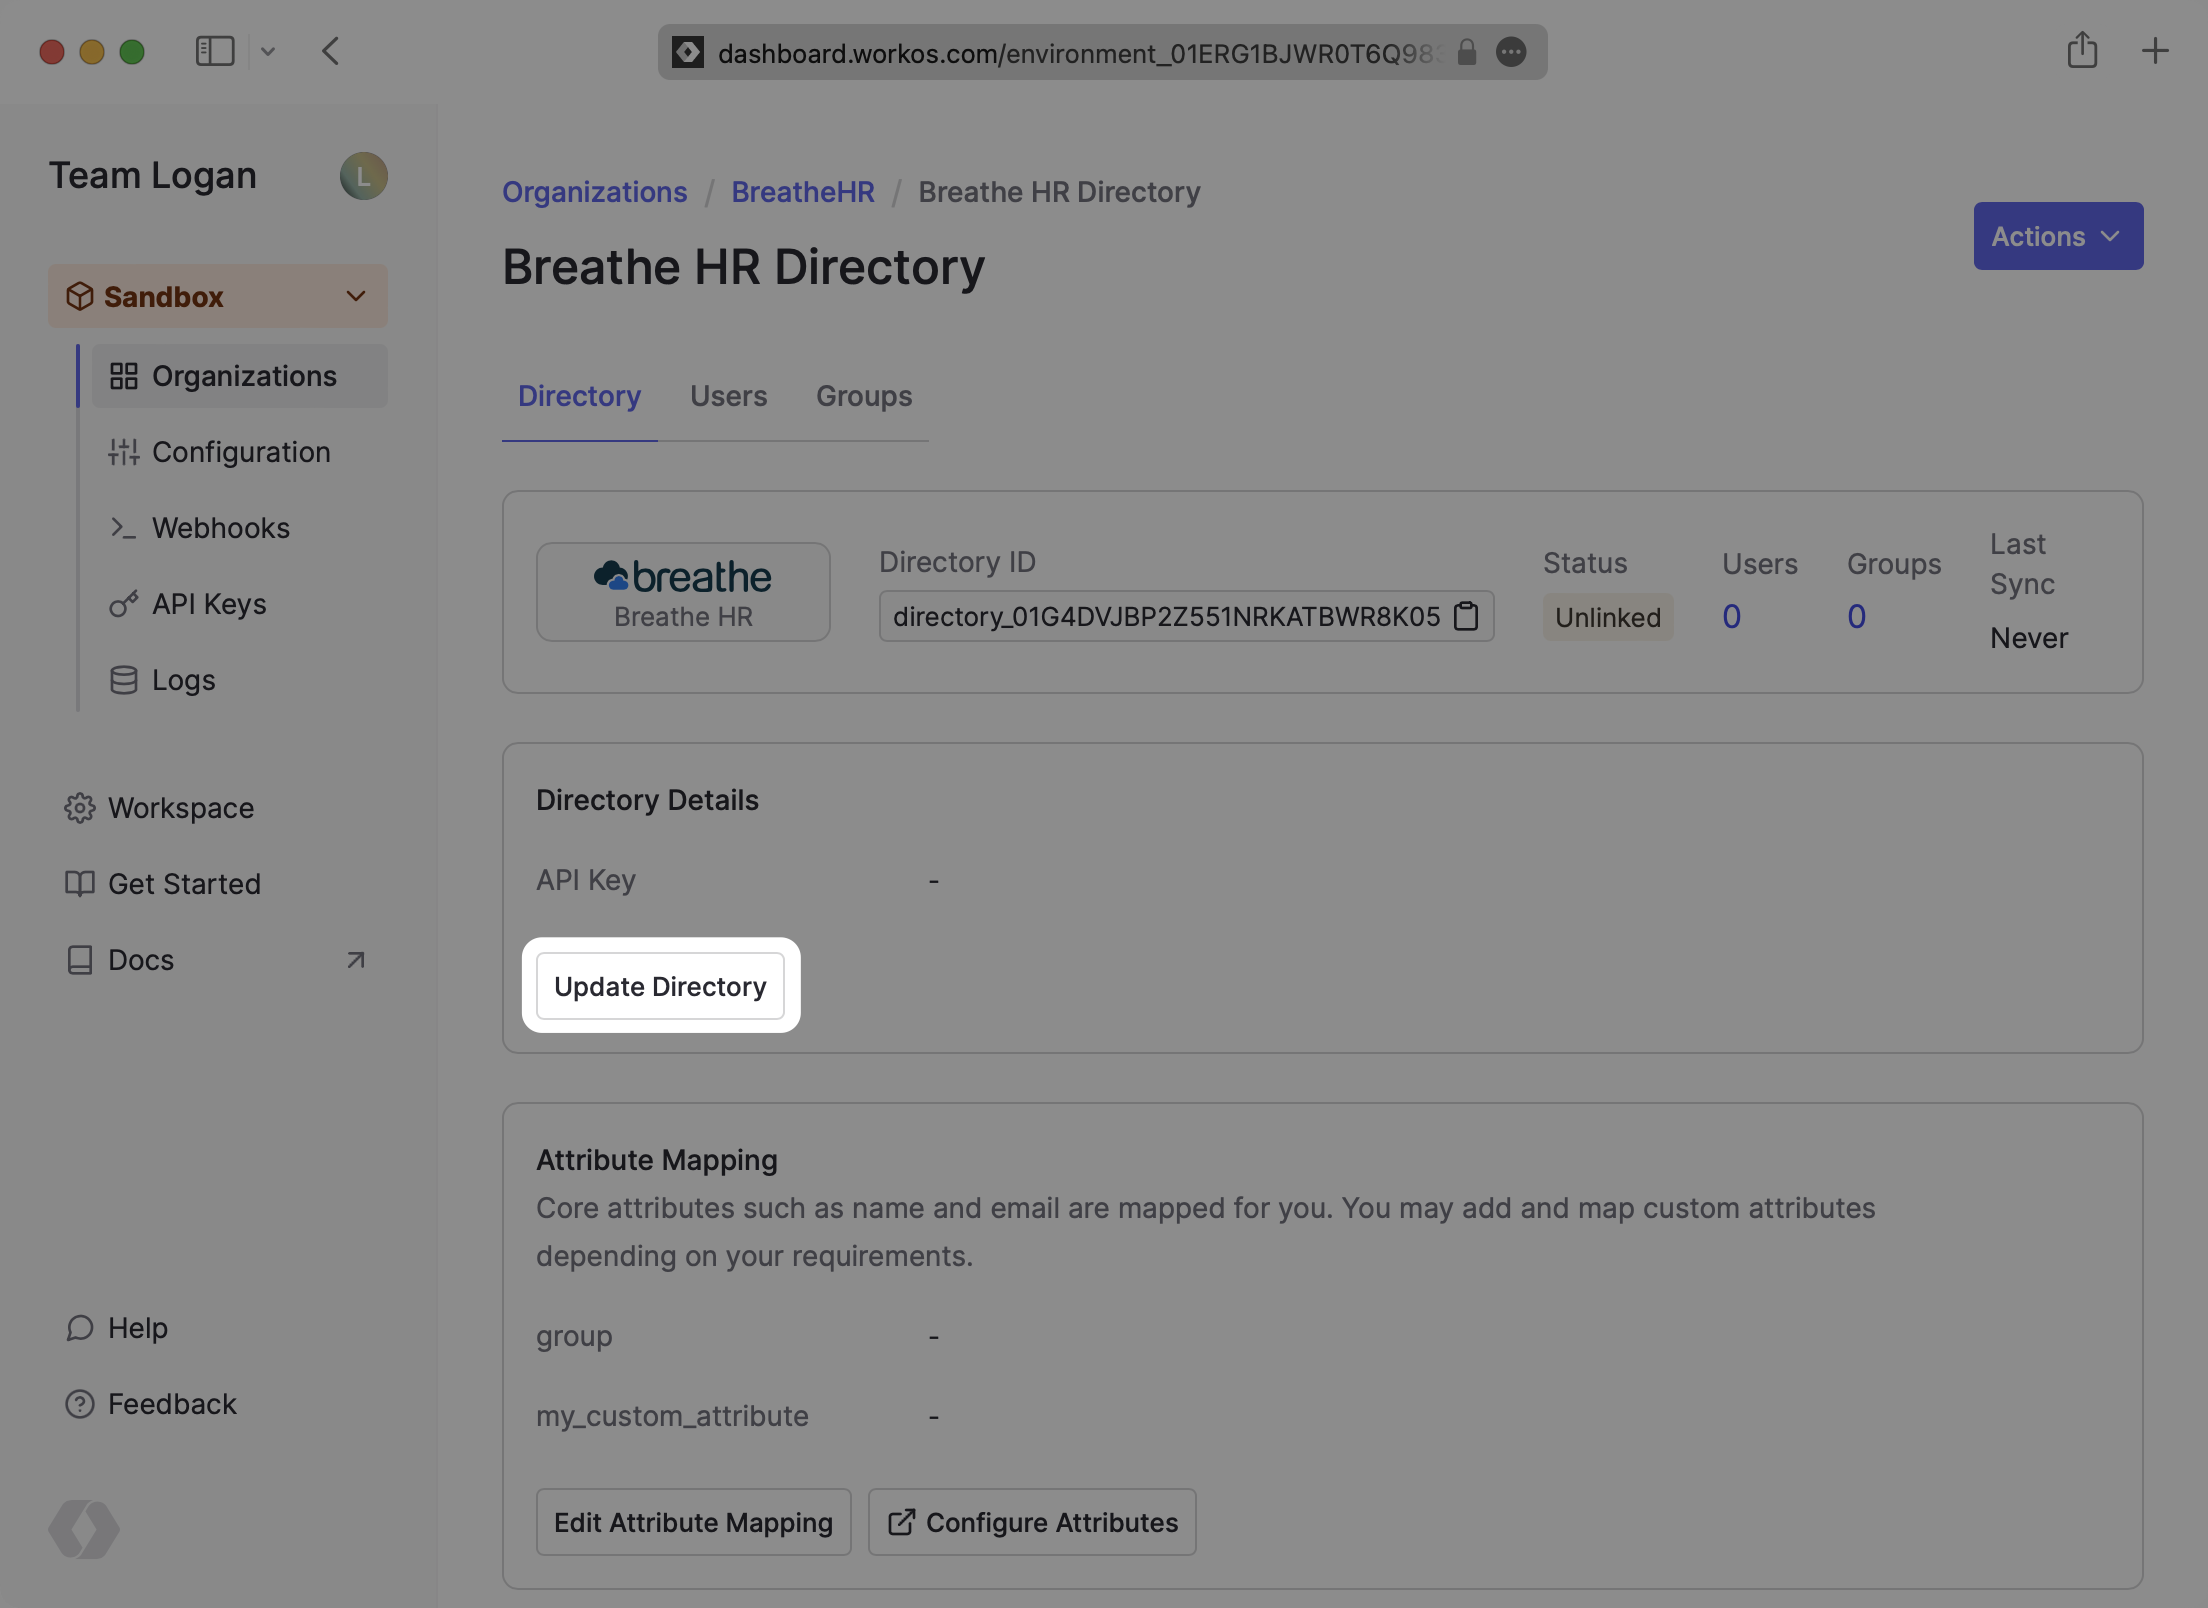 A screenshot showing where to select "Update Directory" in the WorkOS dashboard.